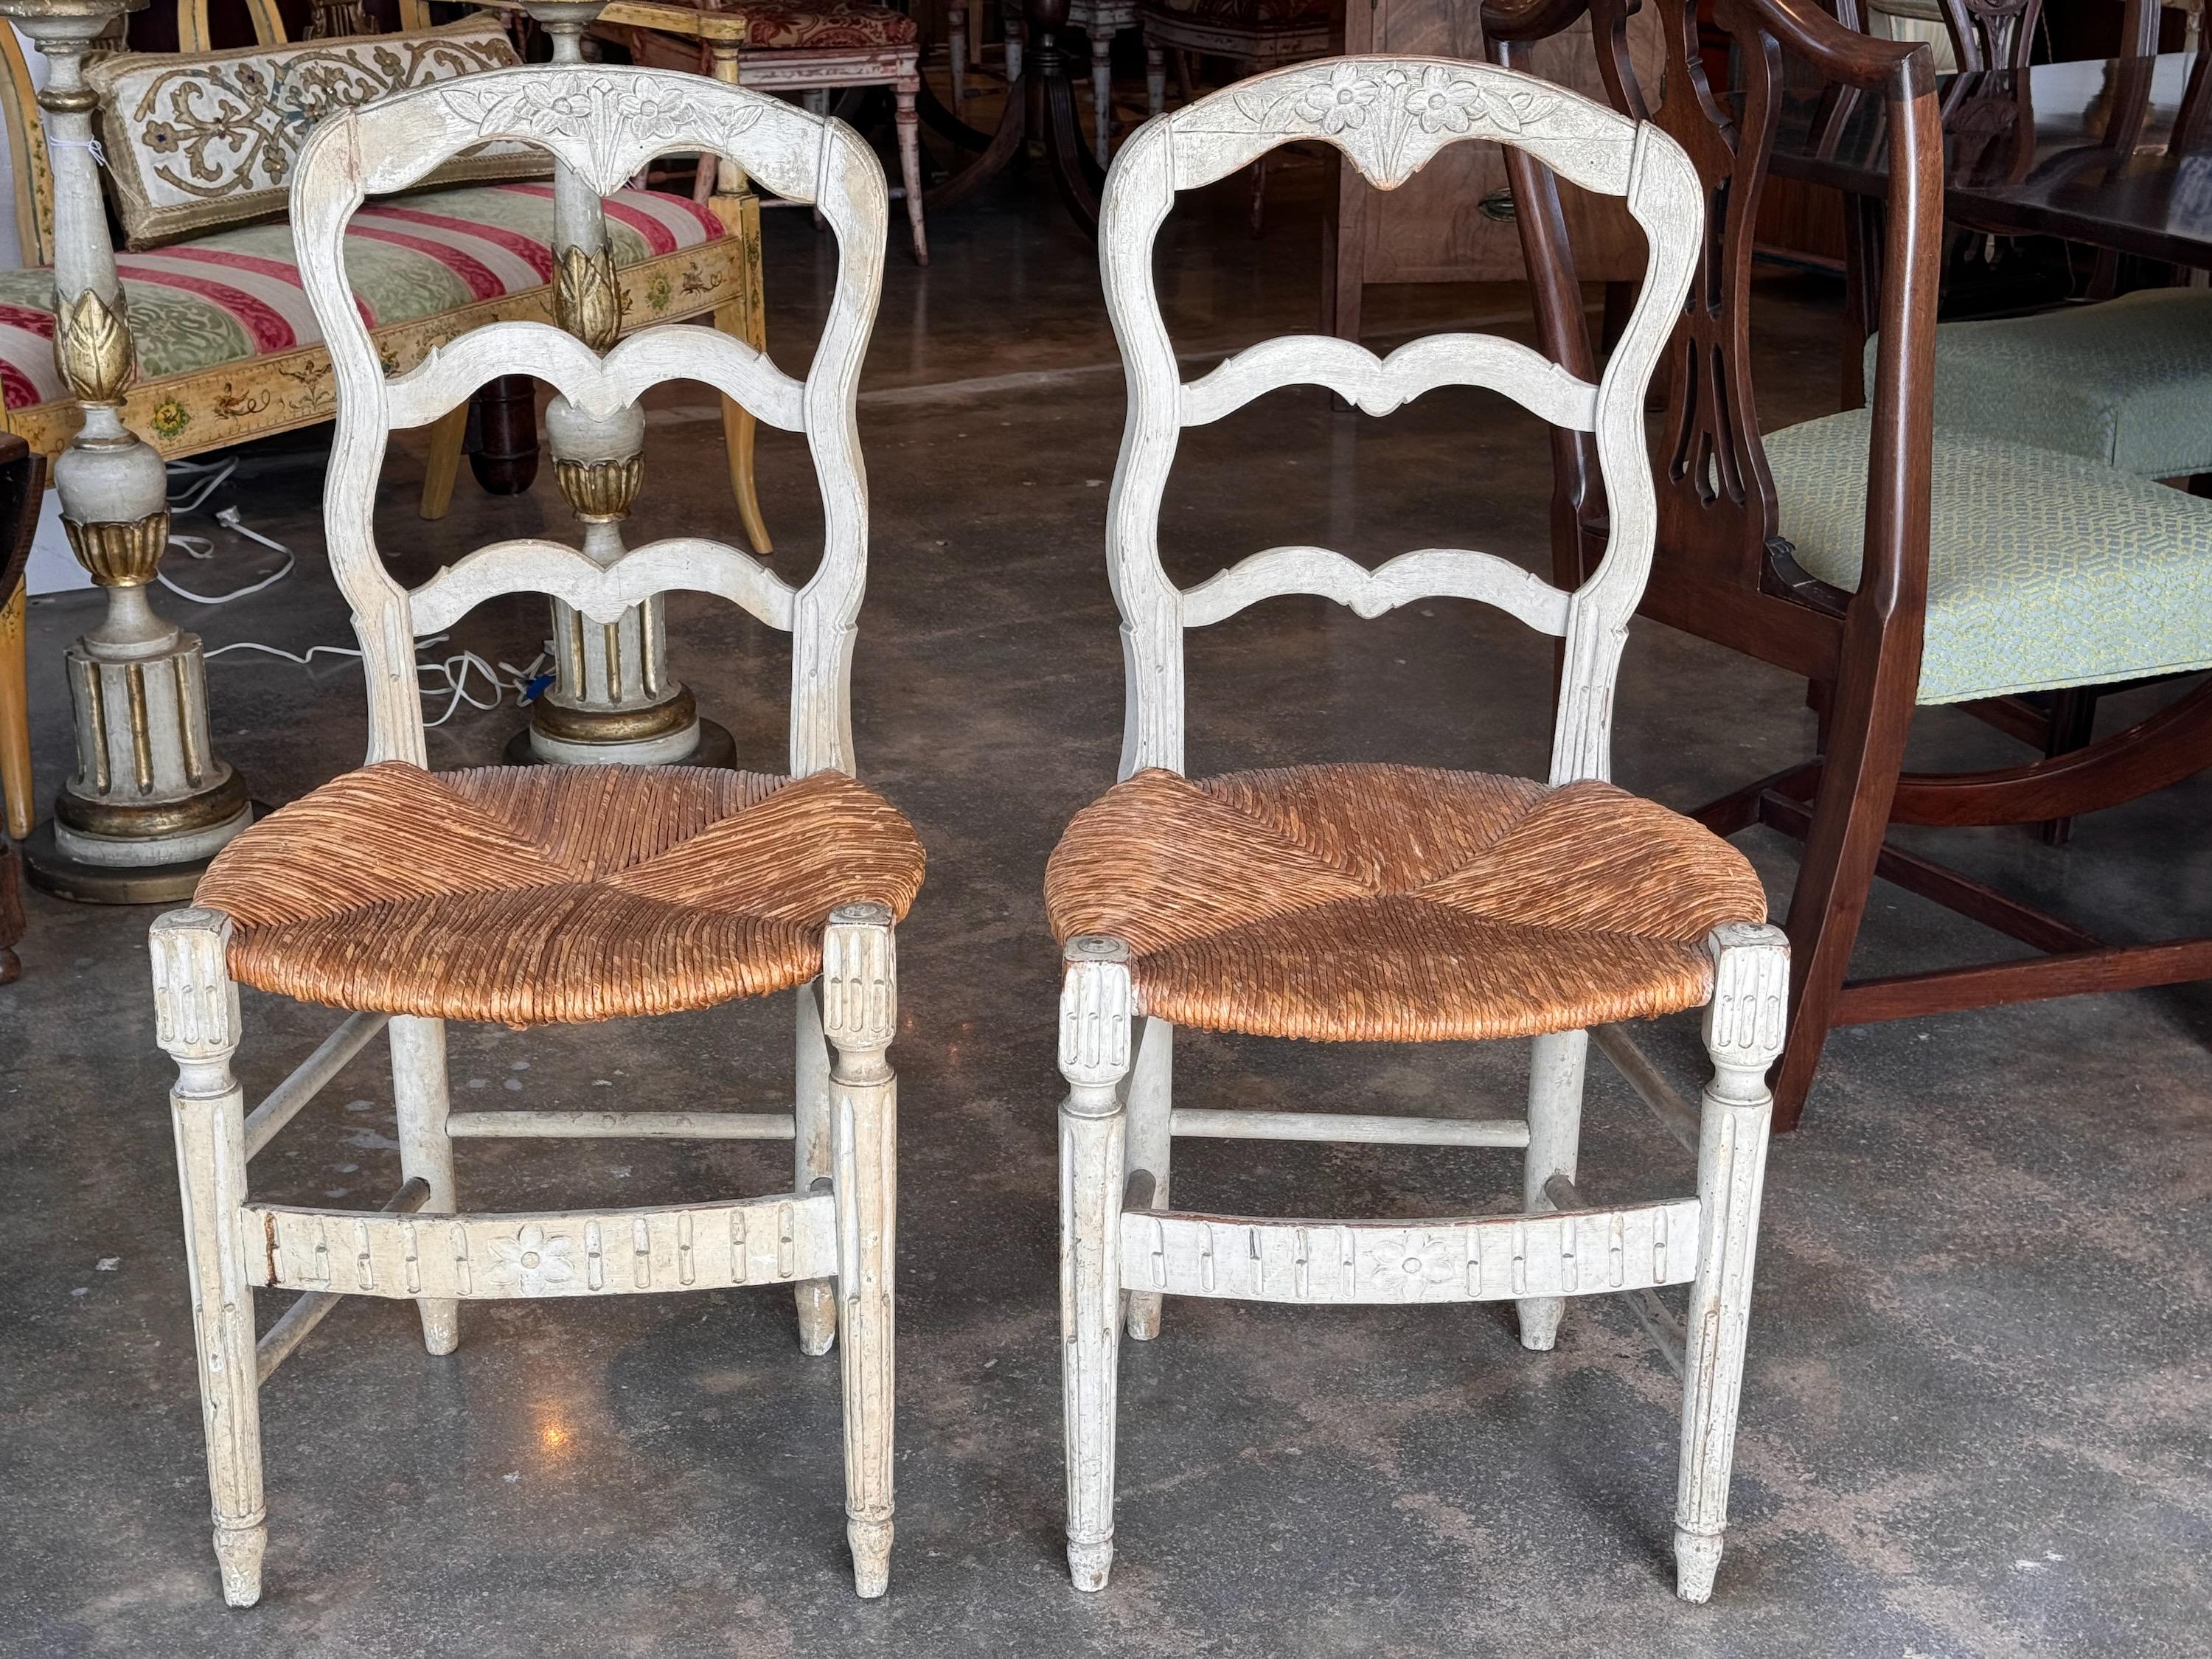 Country chic . A pair of French side chairs, with charming paint.
